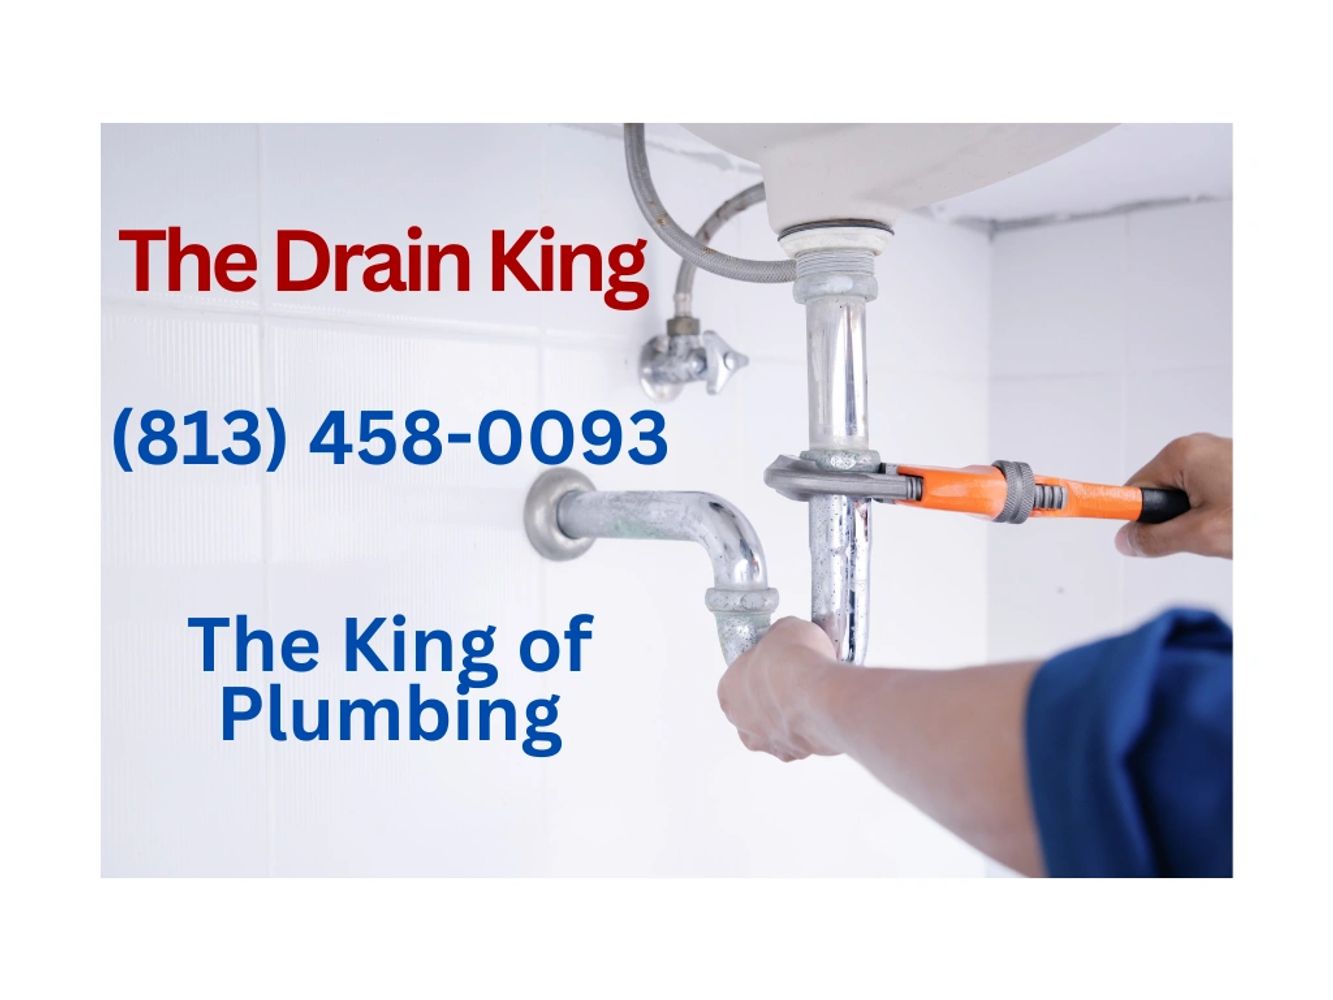 The Drain King photo with phone number and slogan.